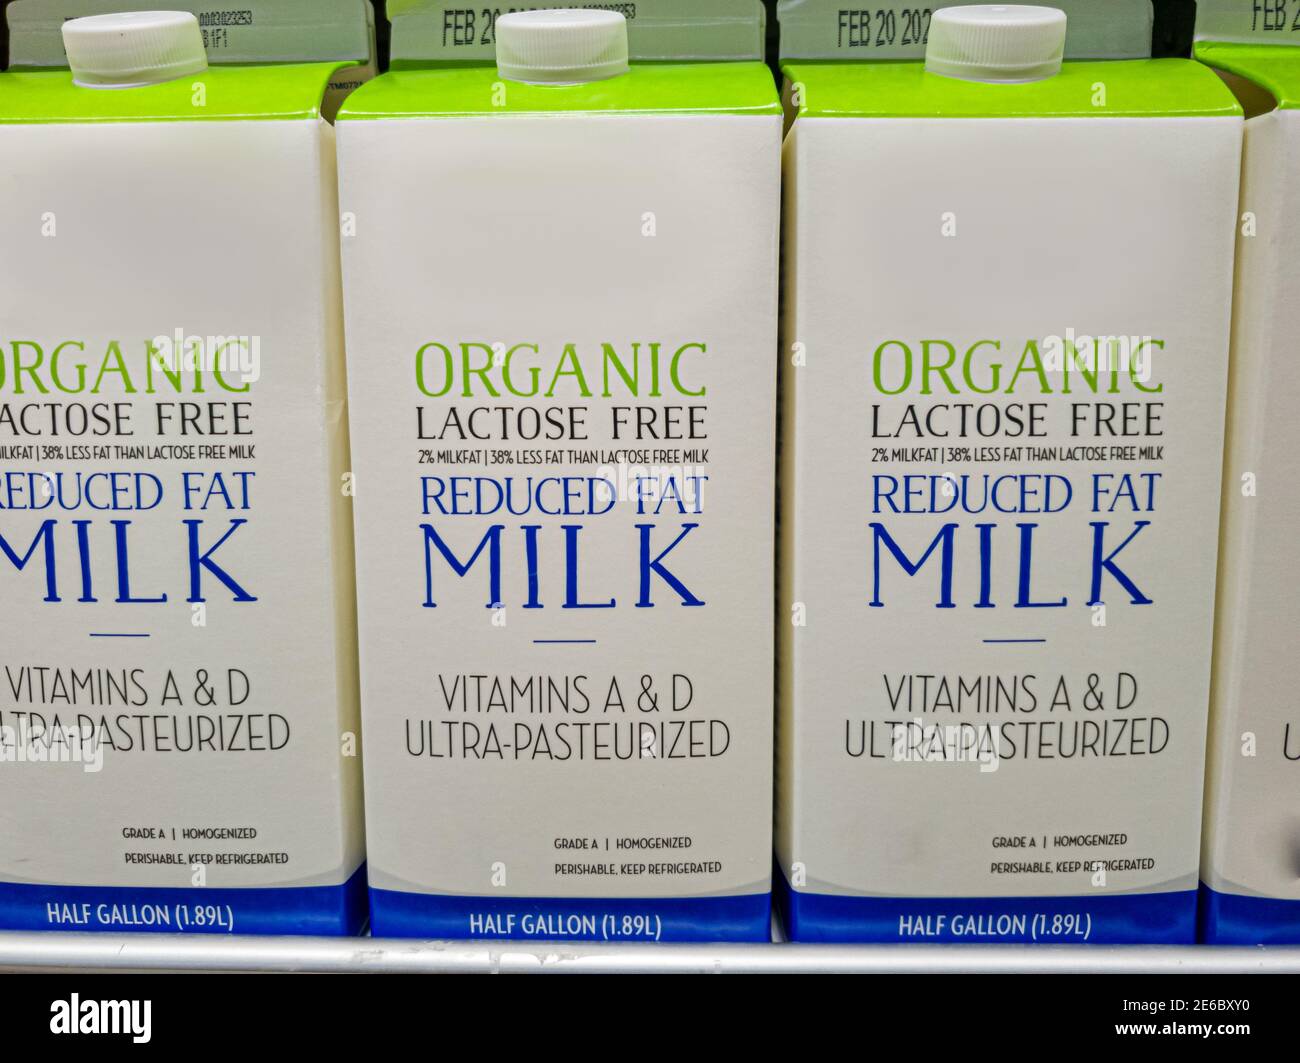 Half gallon cartons of lactose free reduced fat organic milk on fridge shelf. This is for people who are lactose intolerant due to enzymatic deficienc Stock Photo